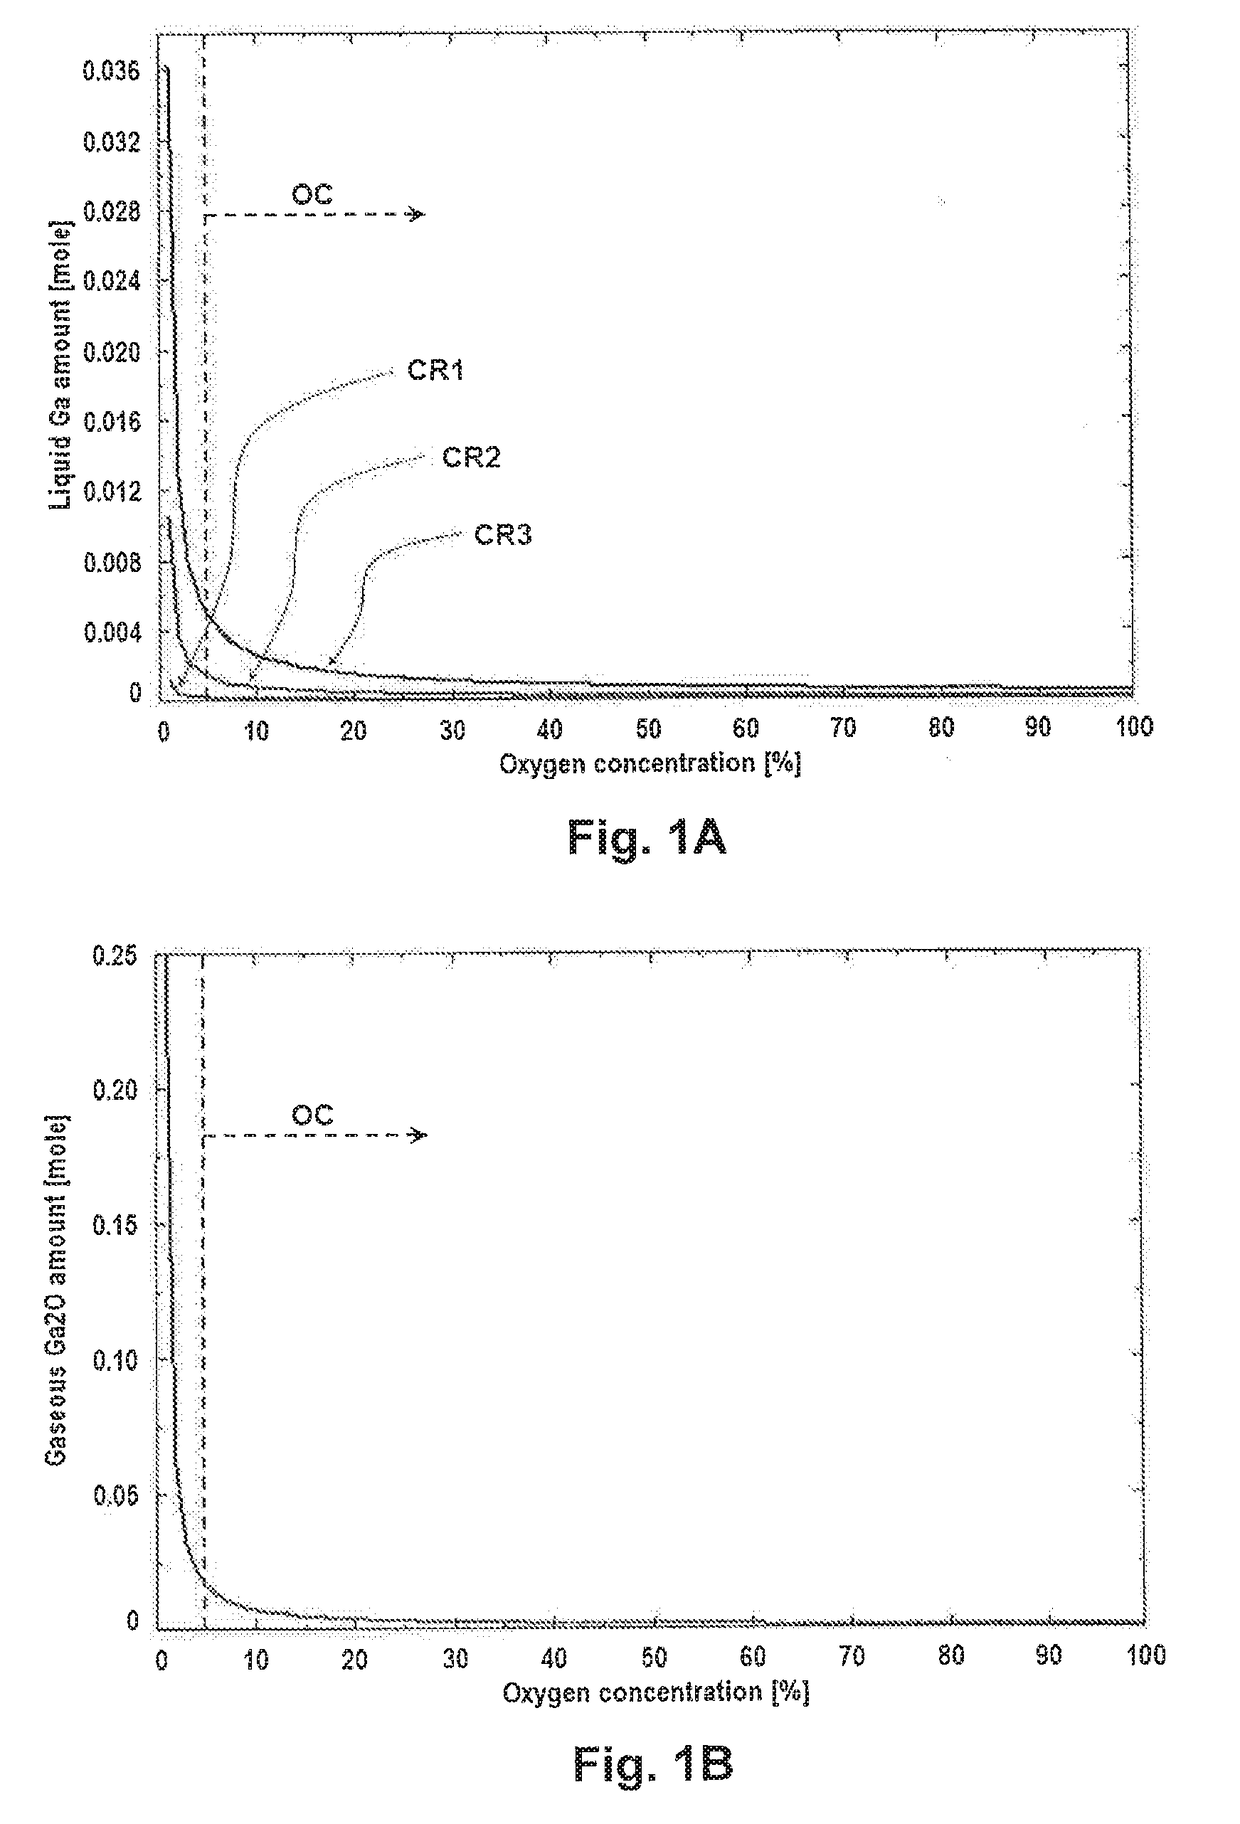 METHOD FOR GROWING BETA PHASE OF GALLIUM OXIDE ([beta]-Ga2O3) SINGLE CRYSTALS FROM THE MELT CONTAINED WITHIN A METAL CRUCIBLE